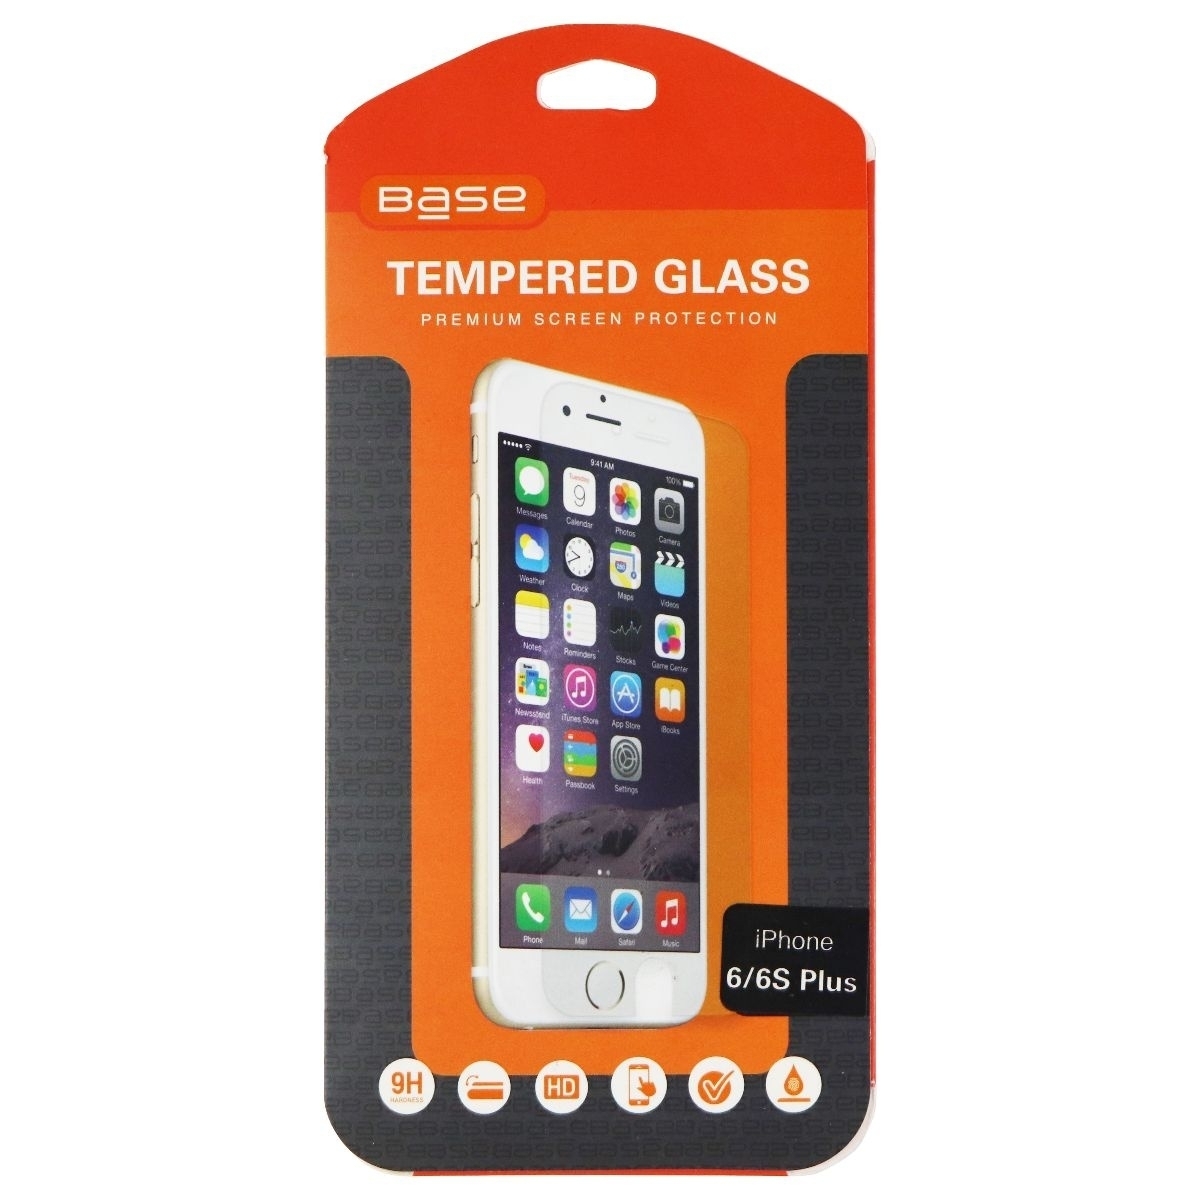 Base Tempered Glass Screen Protector For Apple IPhone 6s Plus & IPhone 6 Plus